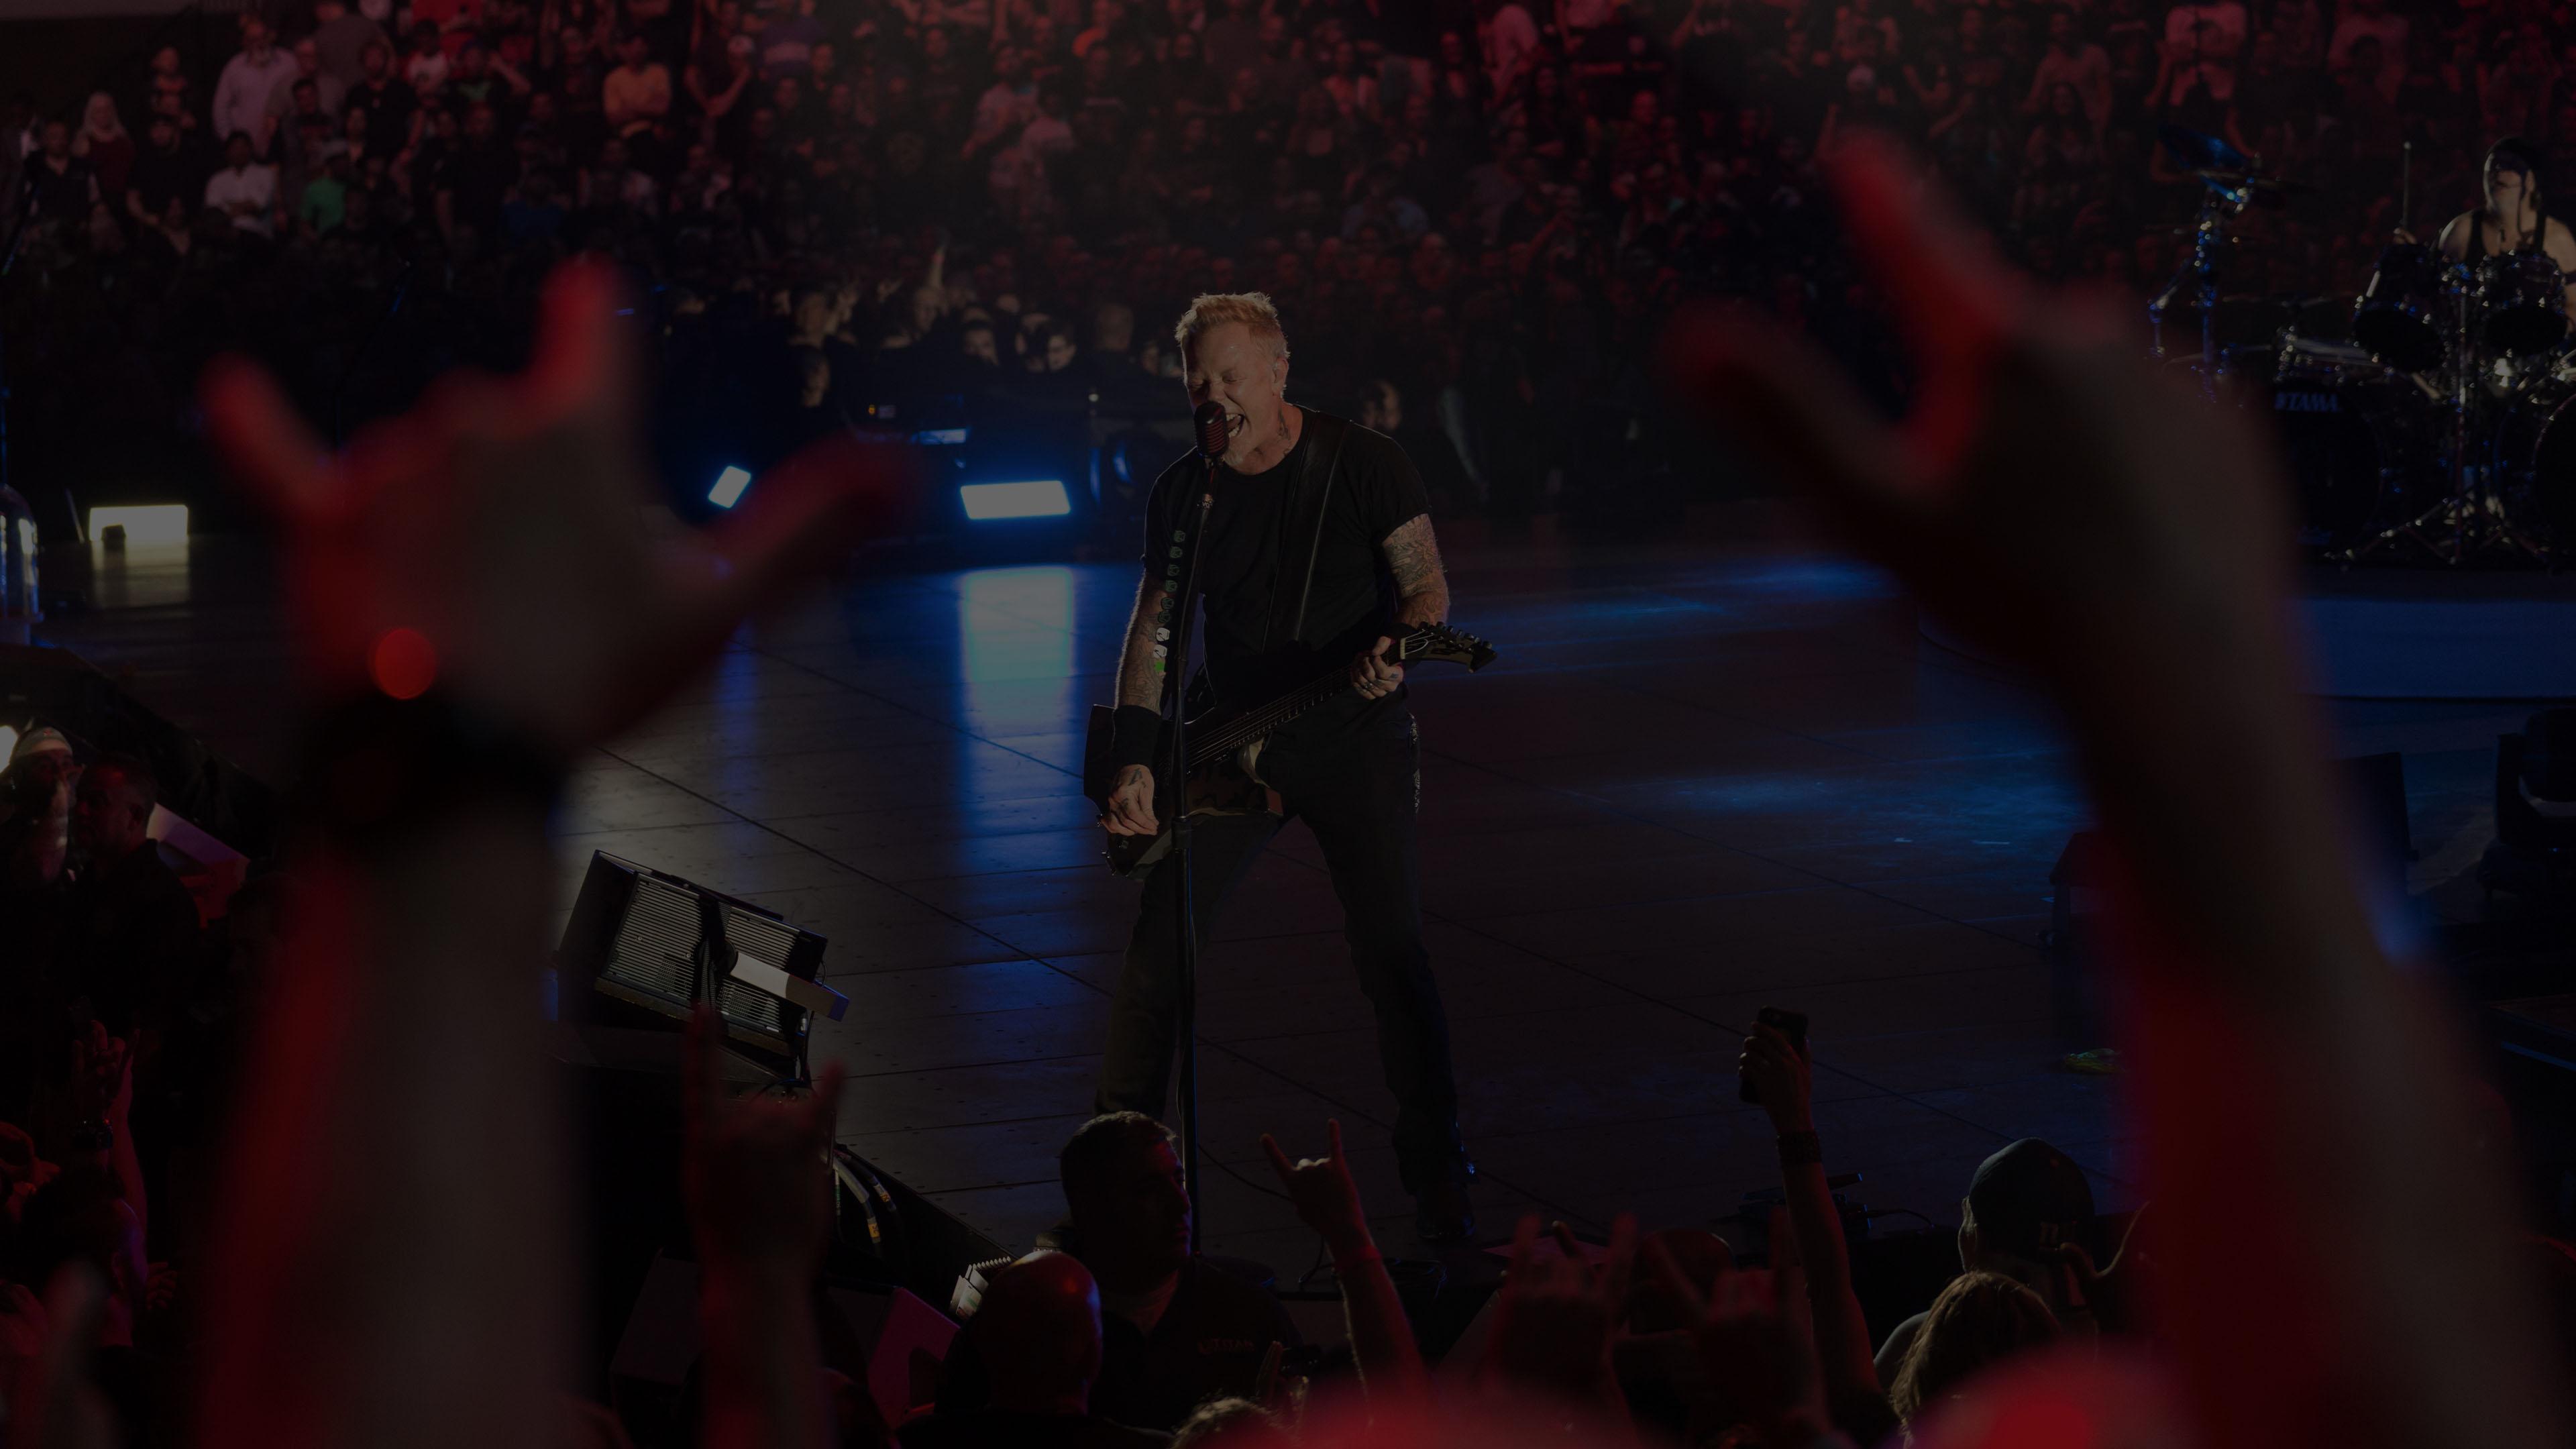 Metallica at Nassau Veterans Memorial Coliseum in Uniondale, NY on May 17, 2017